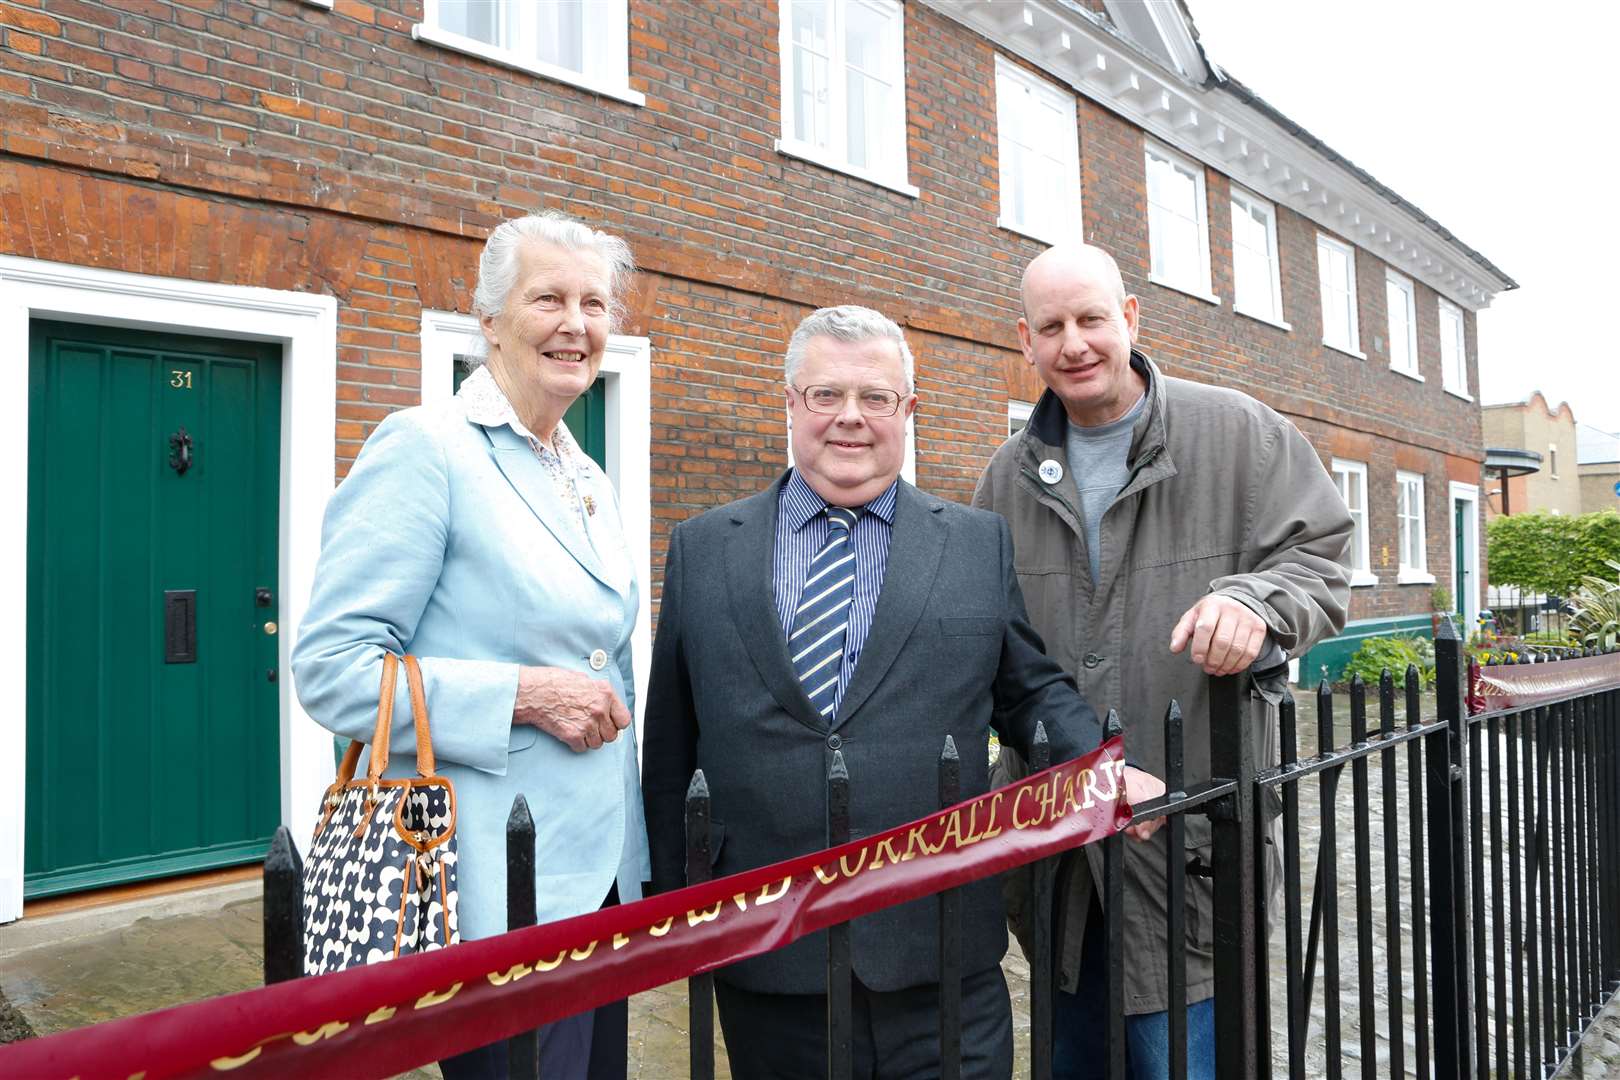 Paul Oldham, centre, pictured at the 2013 re-opening of the refurbished Sir John Banks Almshouses with fellow trustees Cllr Dave Naghi, right, and Jennifer Fenn